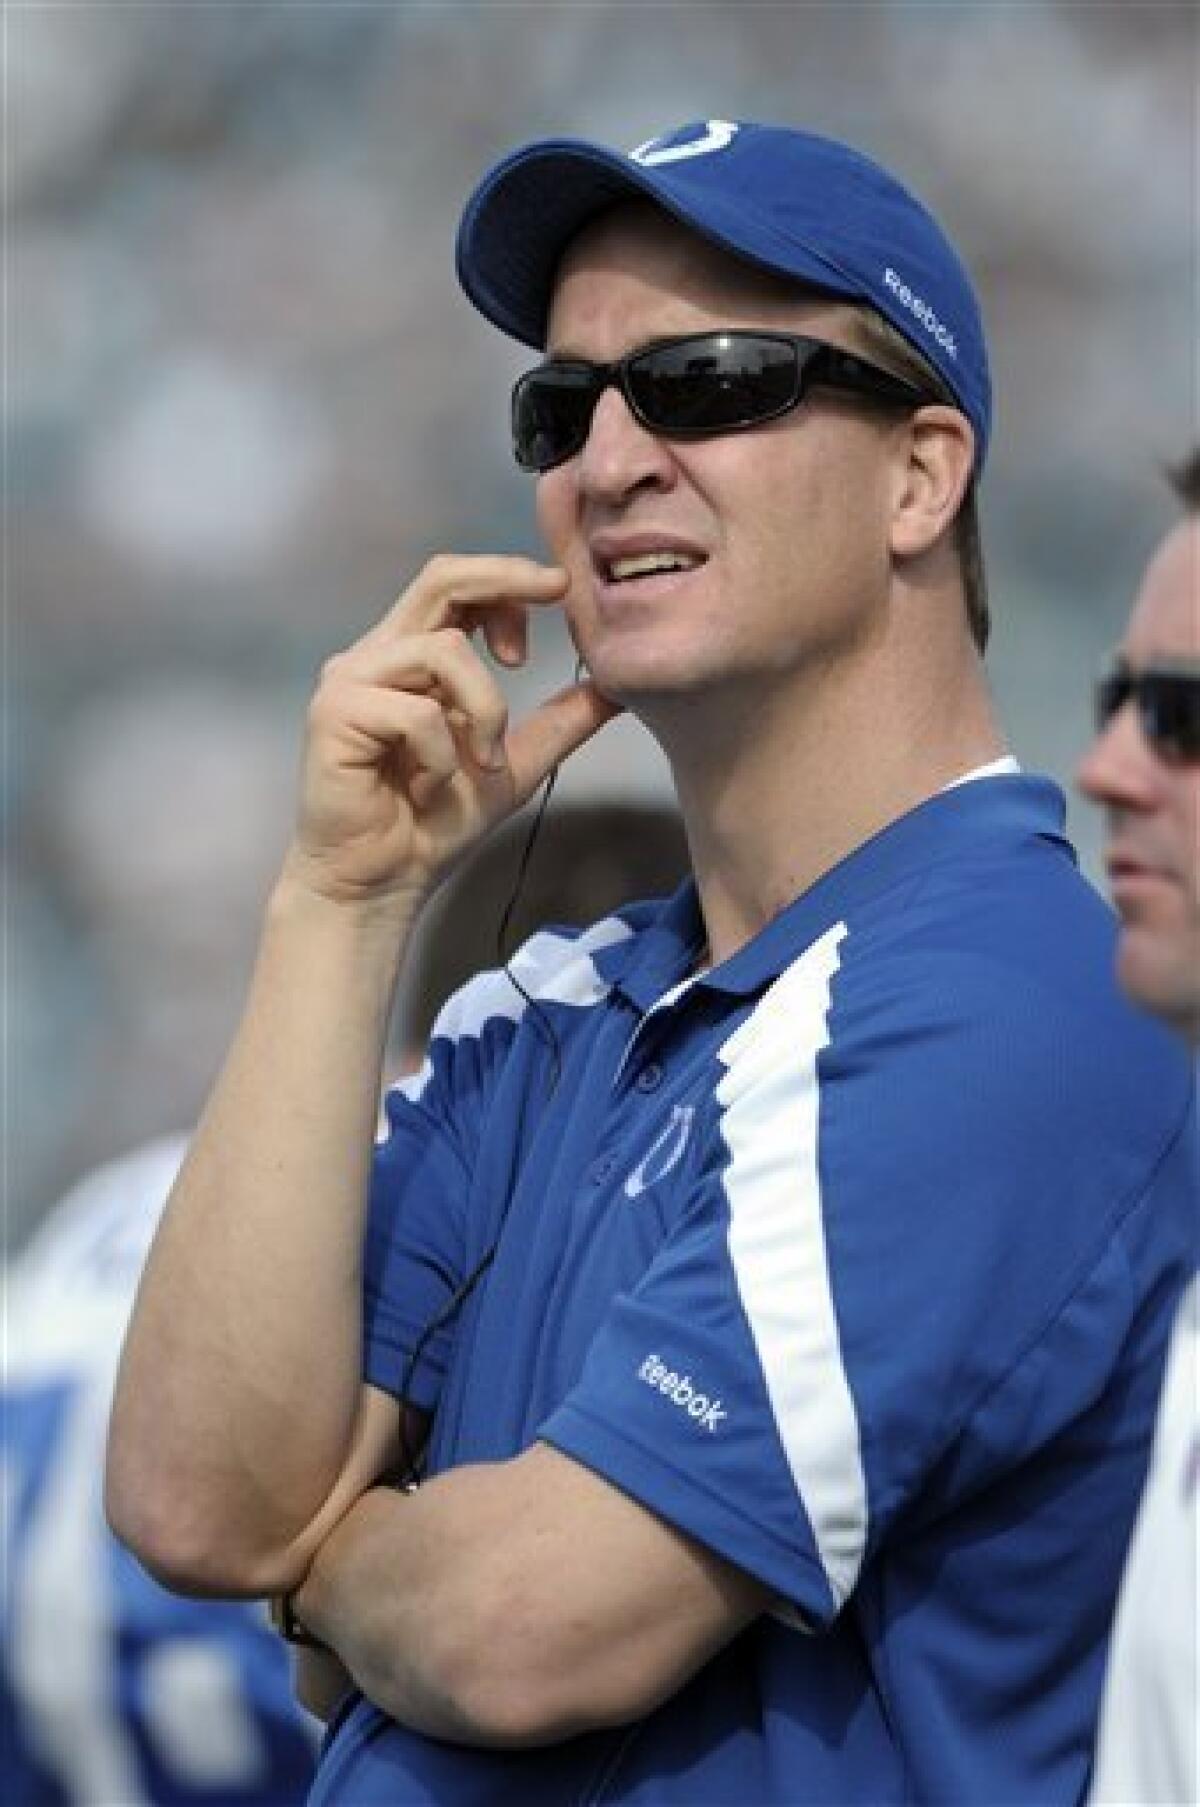 FILE - In this Jan. 1, 2012, file photo, Indianapolis Colts quarterback Peyton Manning watches from the sideline during the first half of an NFL football game against the Jacksonville Jaguars in Jacksonville, Fla. Shortly after introducing Chuck Pagano as Indianapolis' new coach, team owner Jim Irsay responded to the comments Manning made earlier this week about the Colts by referring to the only four-time league MVP as a "politician." (AP Photo/Phelan M. Ebenhack, File)